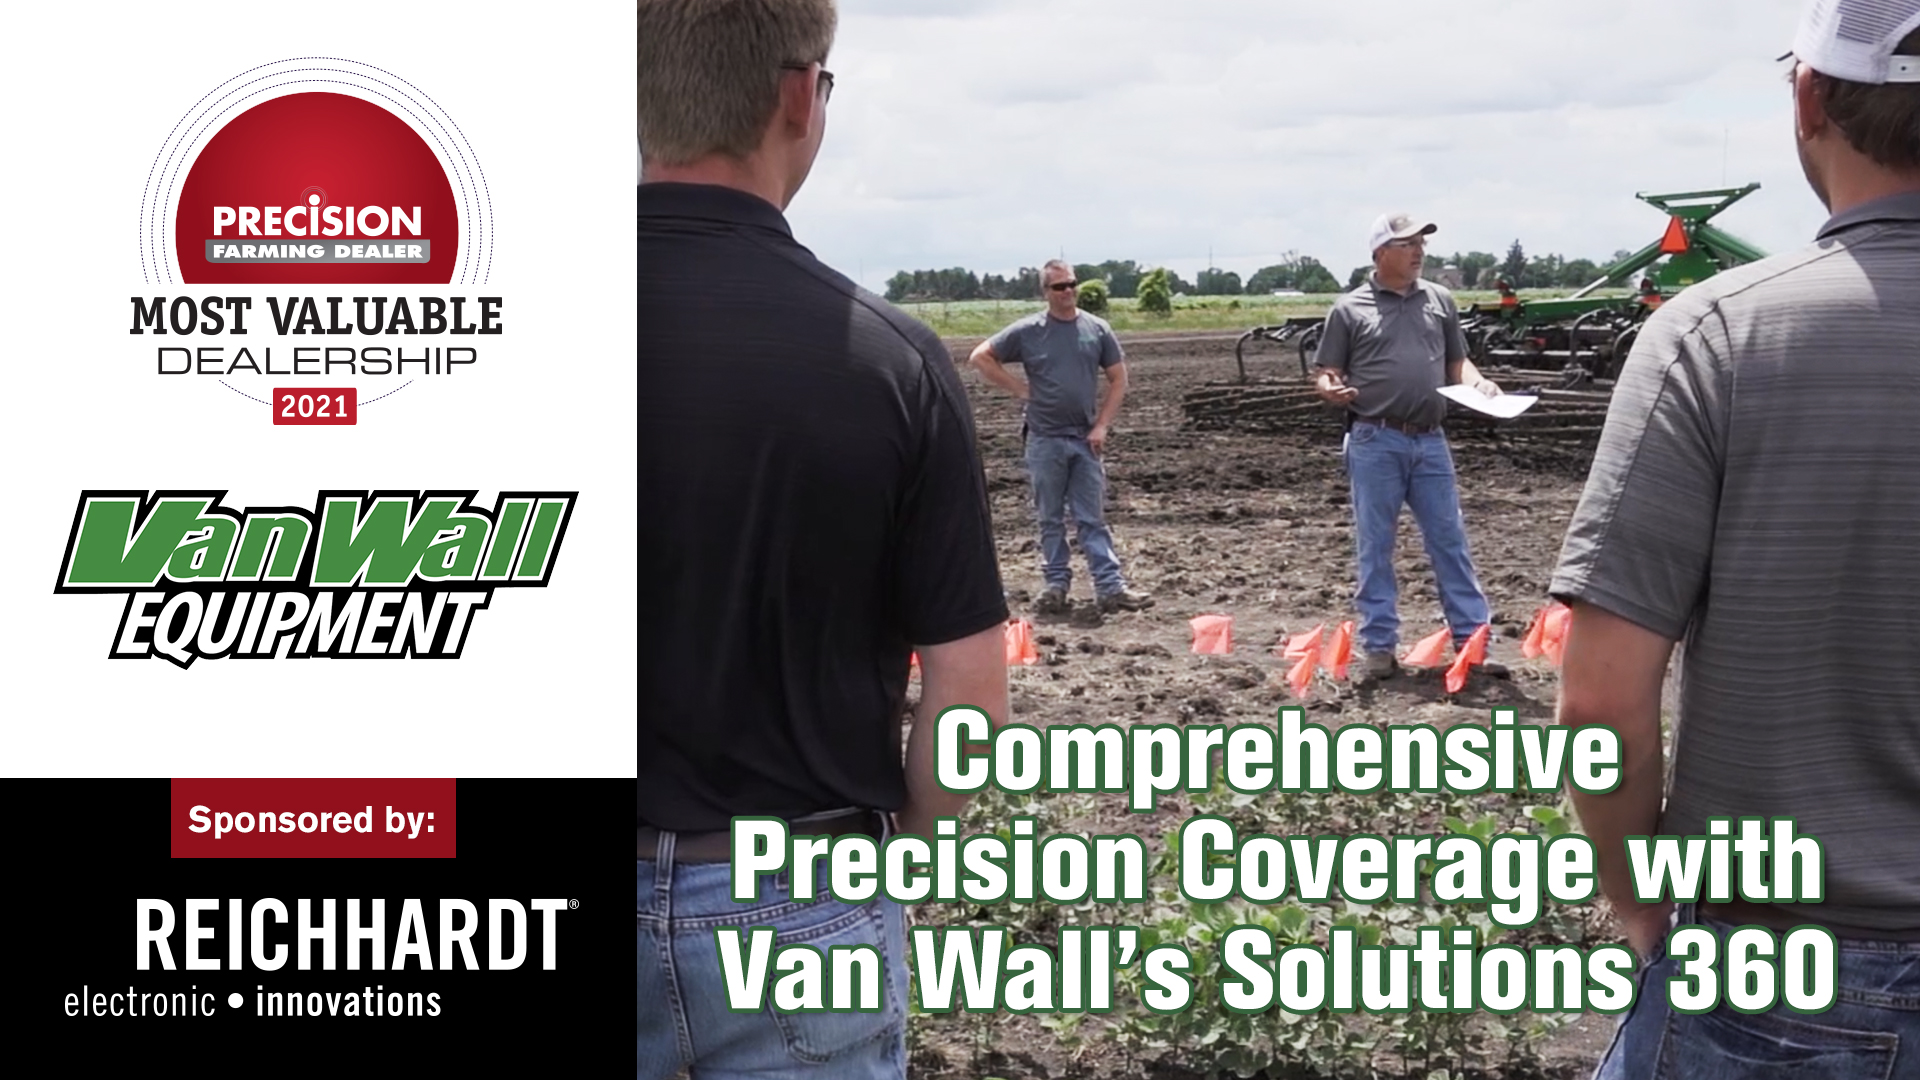 Comprehensive-Precision-Coverage-with-Van-Walls-Solutions-360.jpg